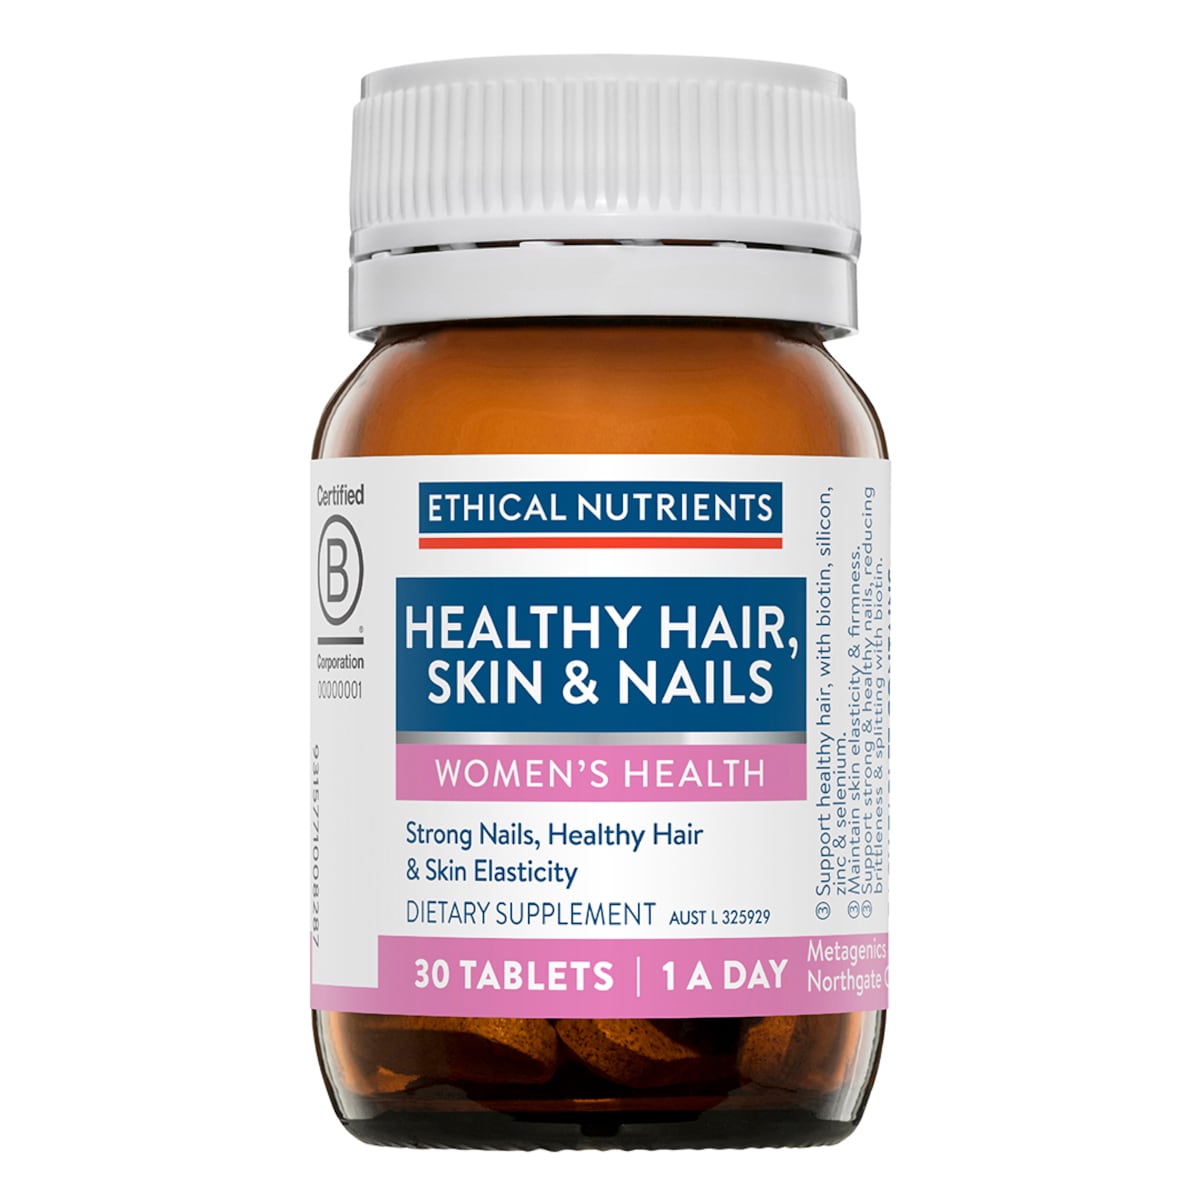 Ethical Nutrients Healthy Hair Skin & Nails - 30 Tablets